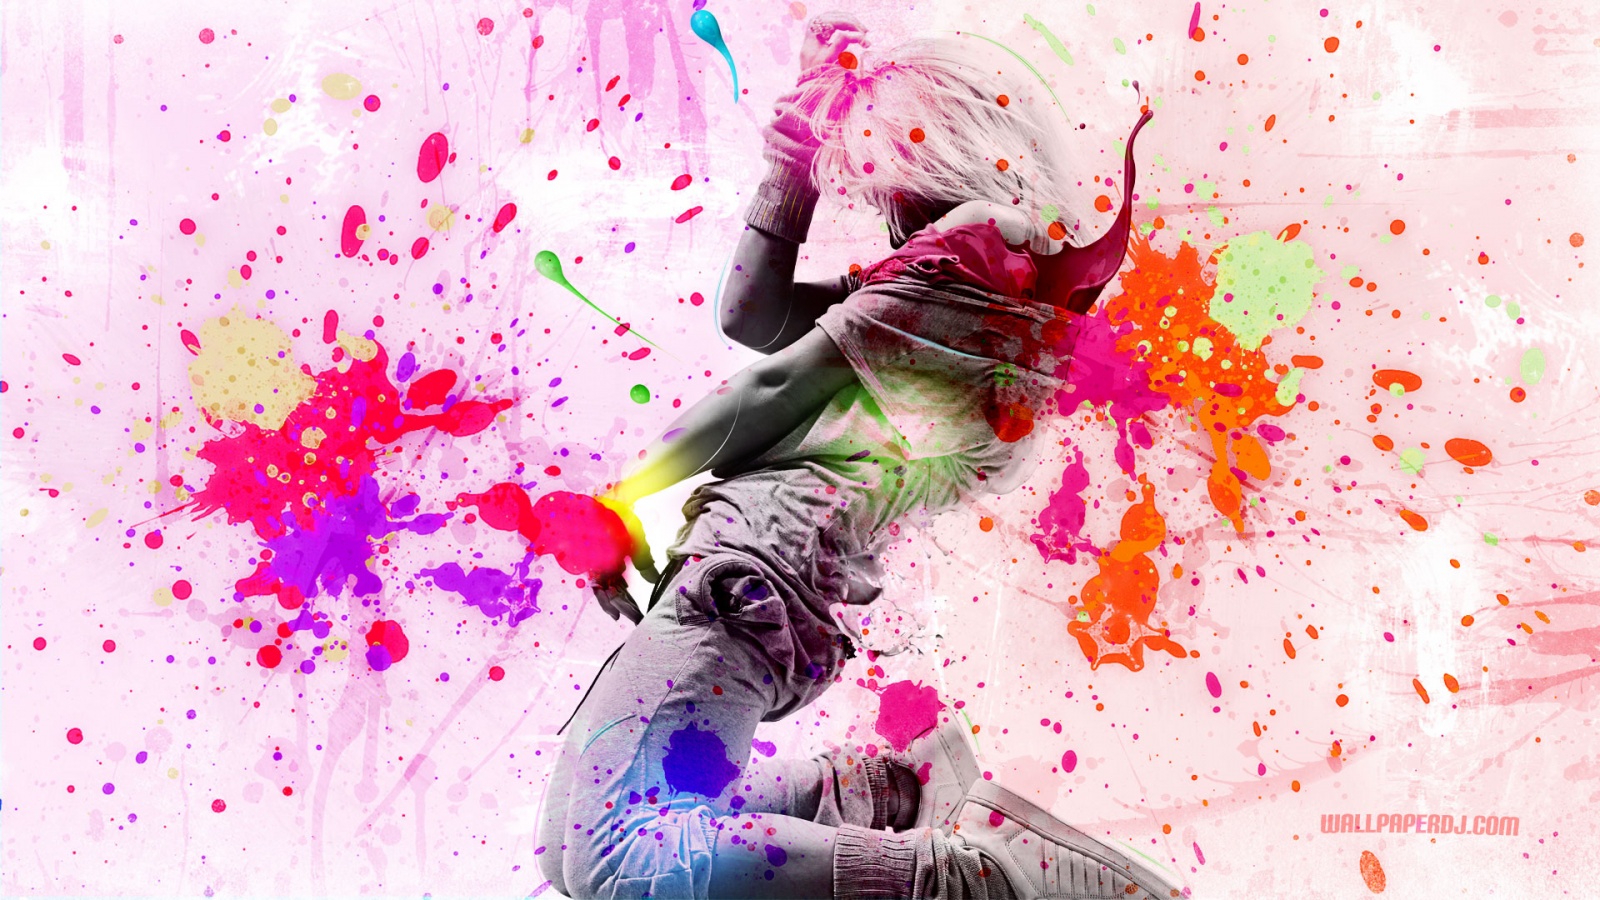 1600x900 Dancing With Colors wallpaper, music and dance wallpapers